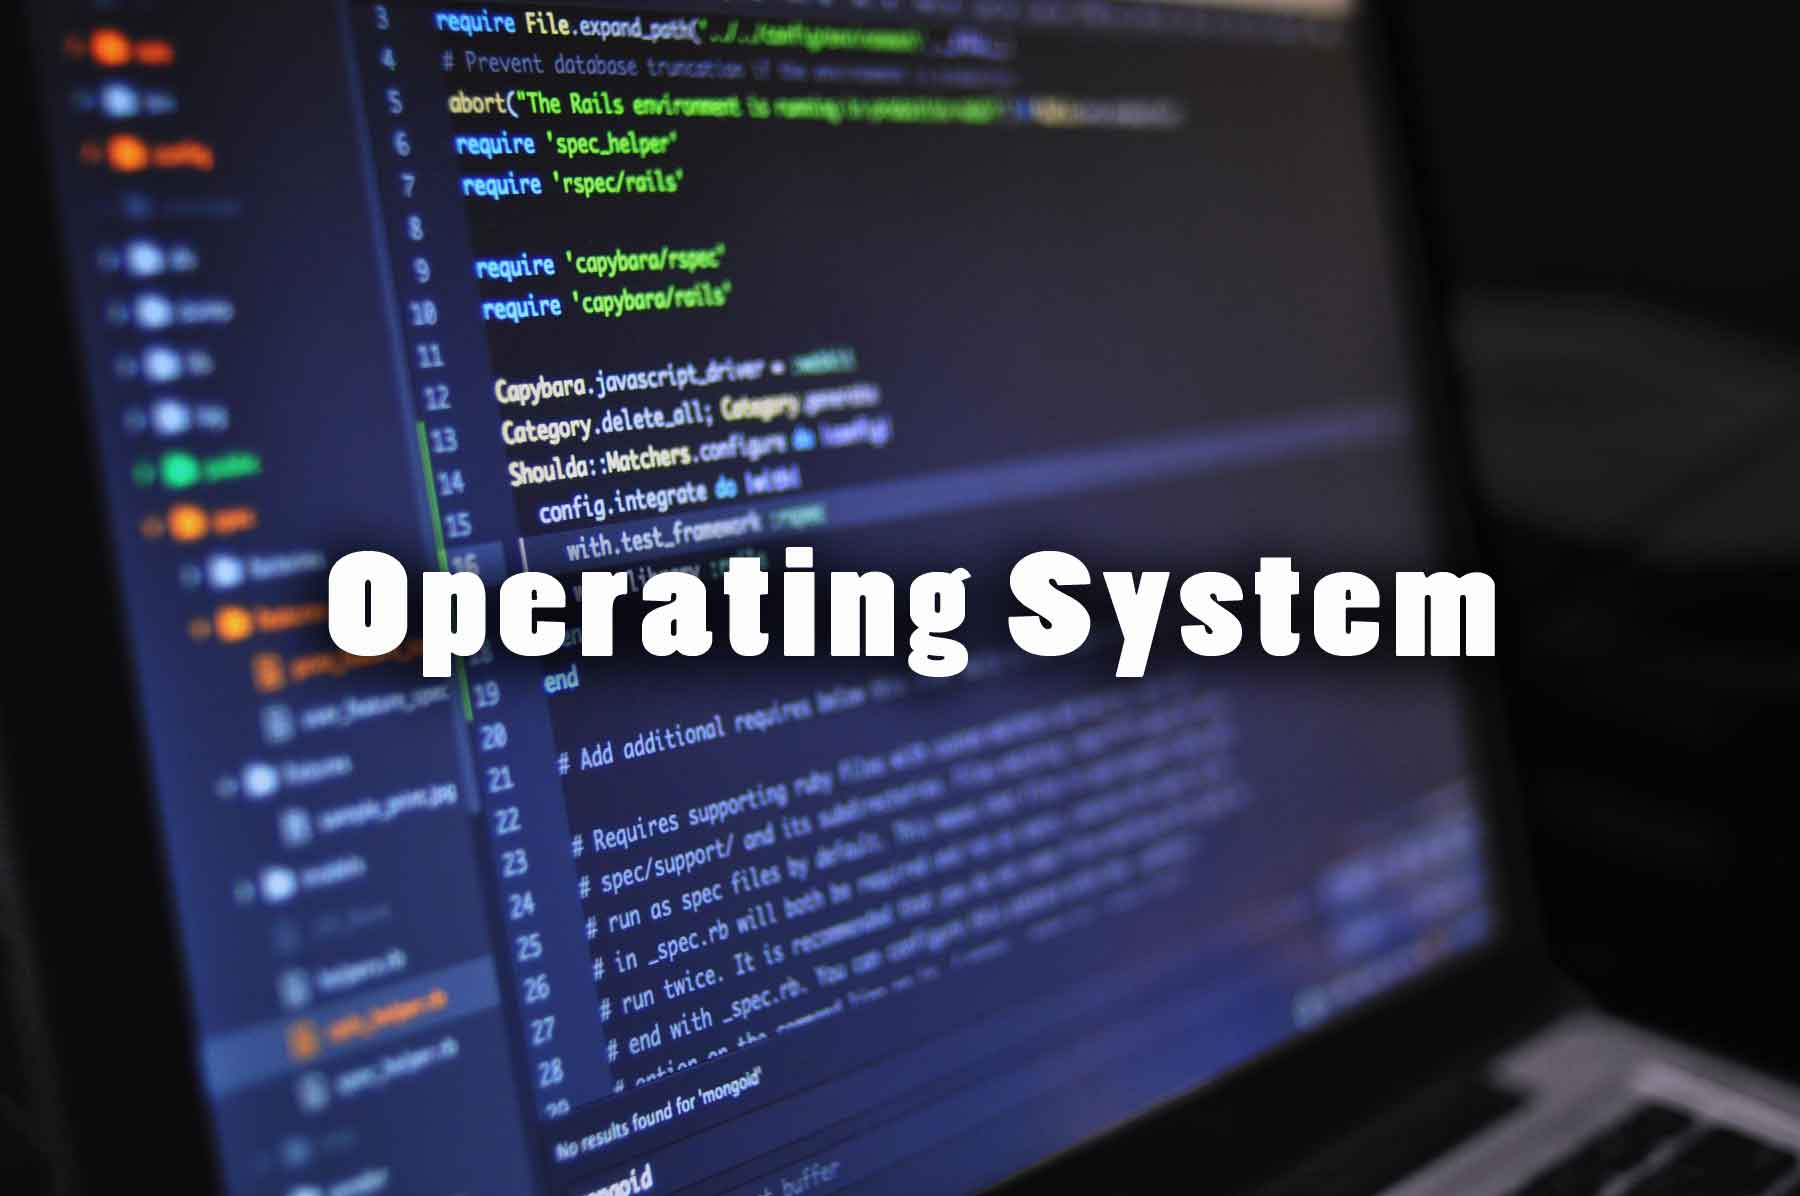 Operating System Objective Questions and Answers